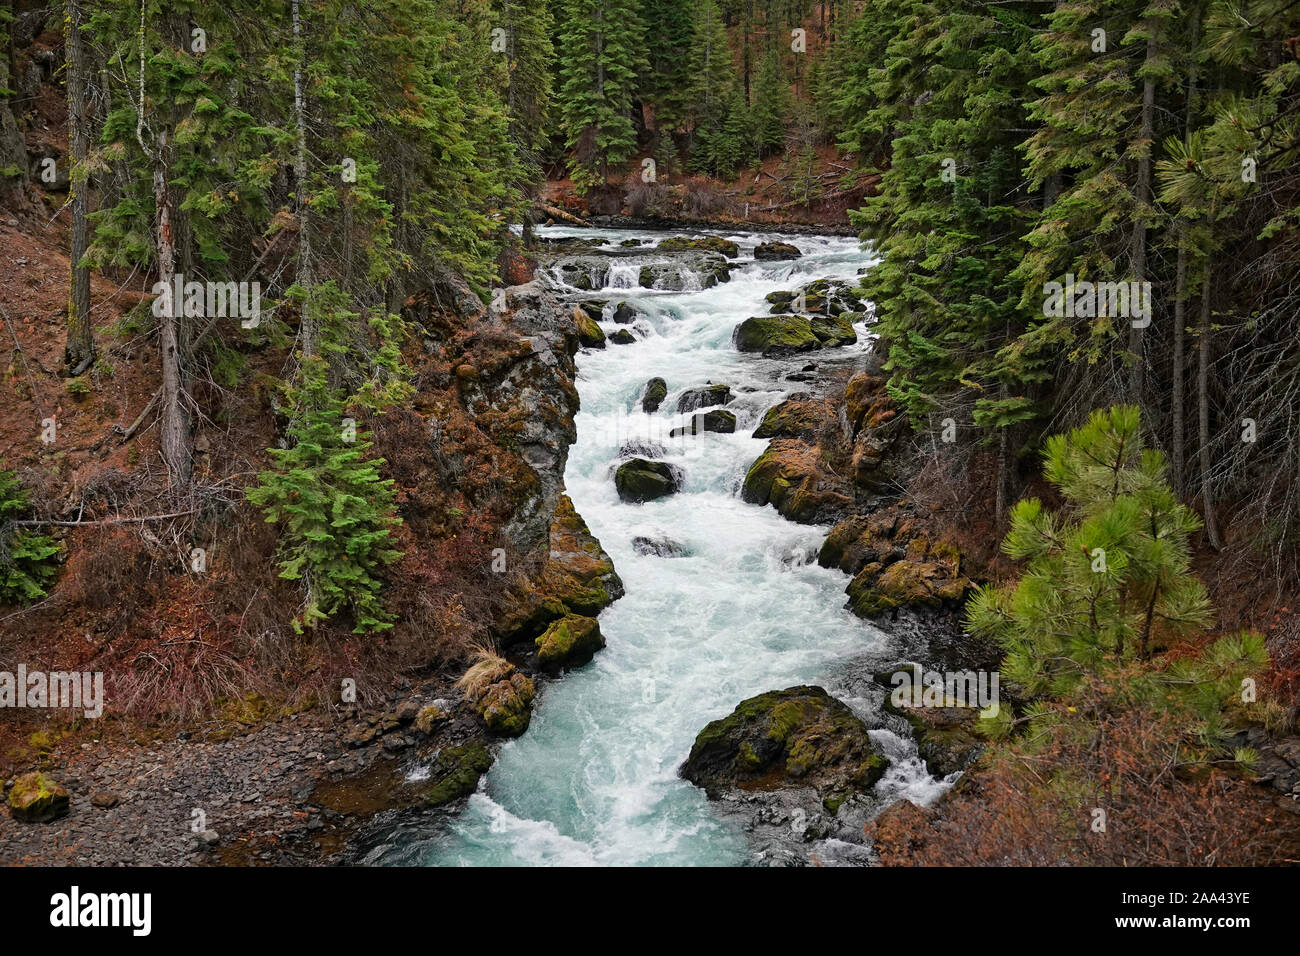 A view of Benham Falls, a major waterfall on the Deschutes River in the Deschutes National Forest in central Oregon. Stock Photo